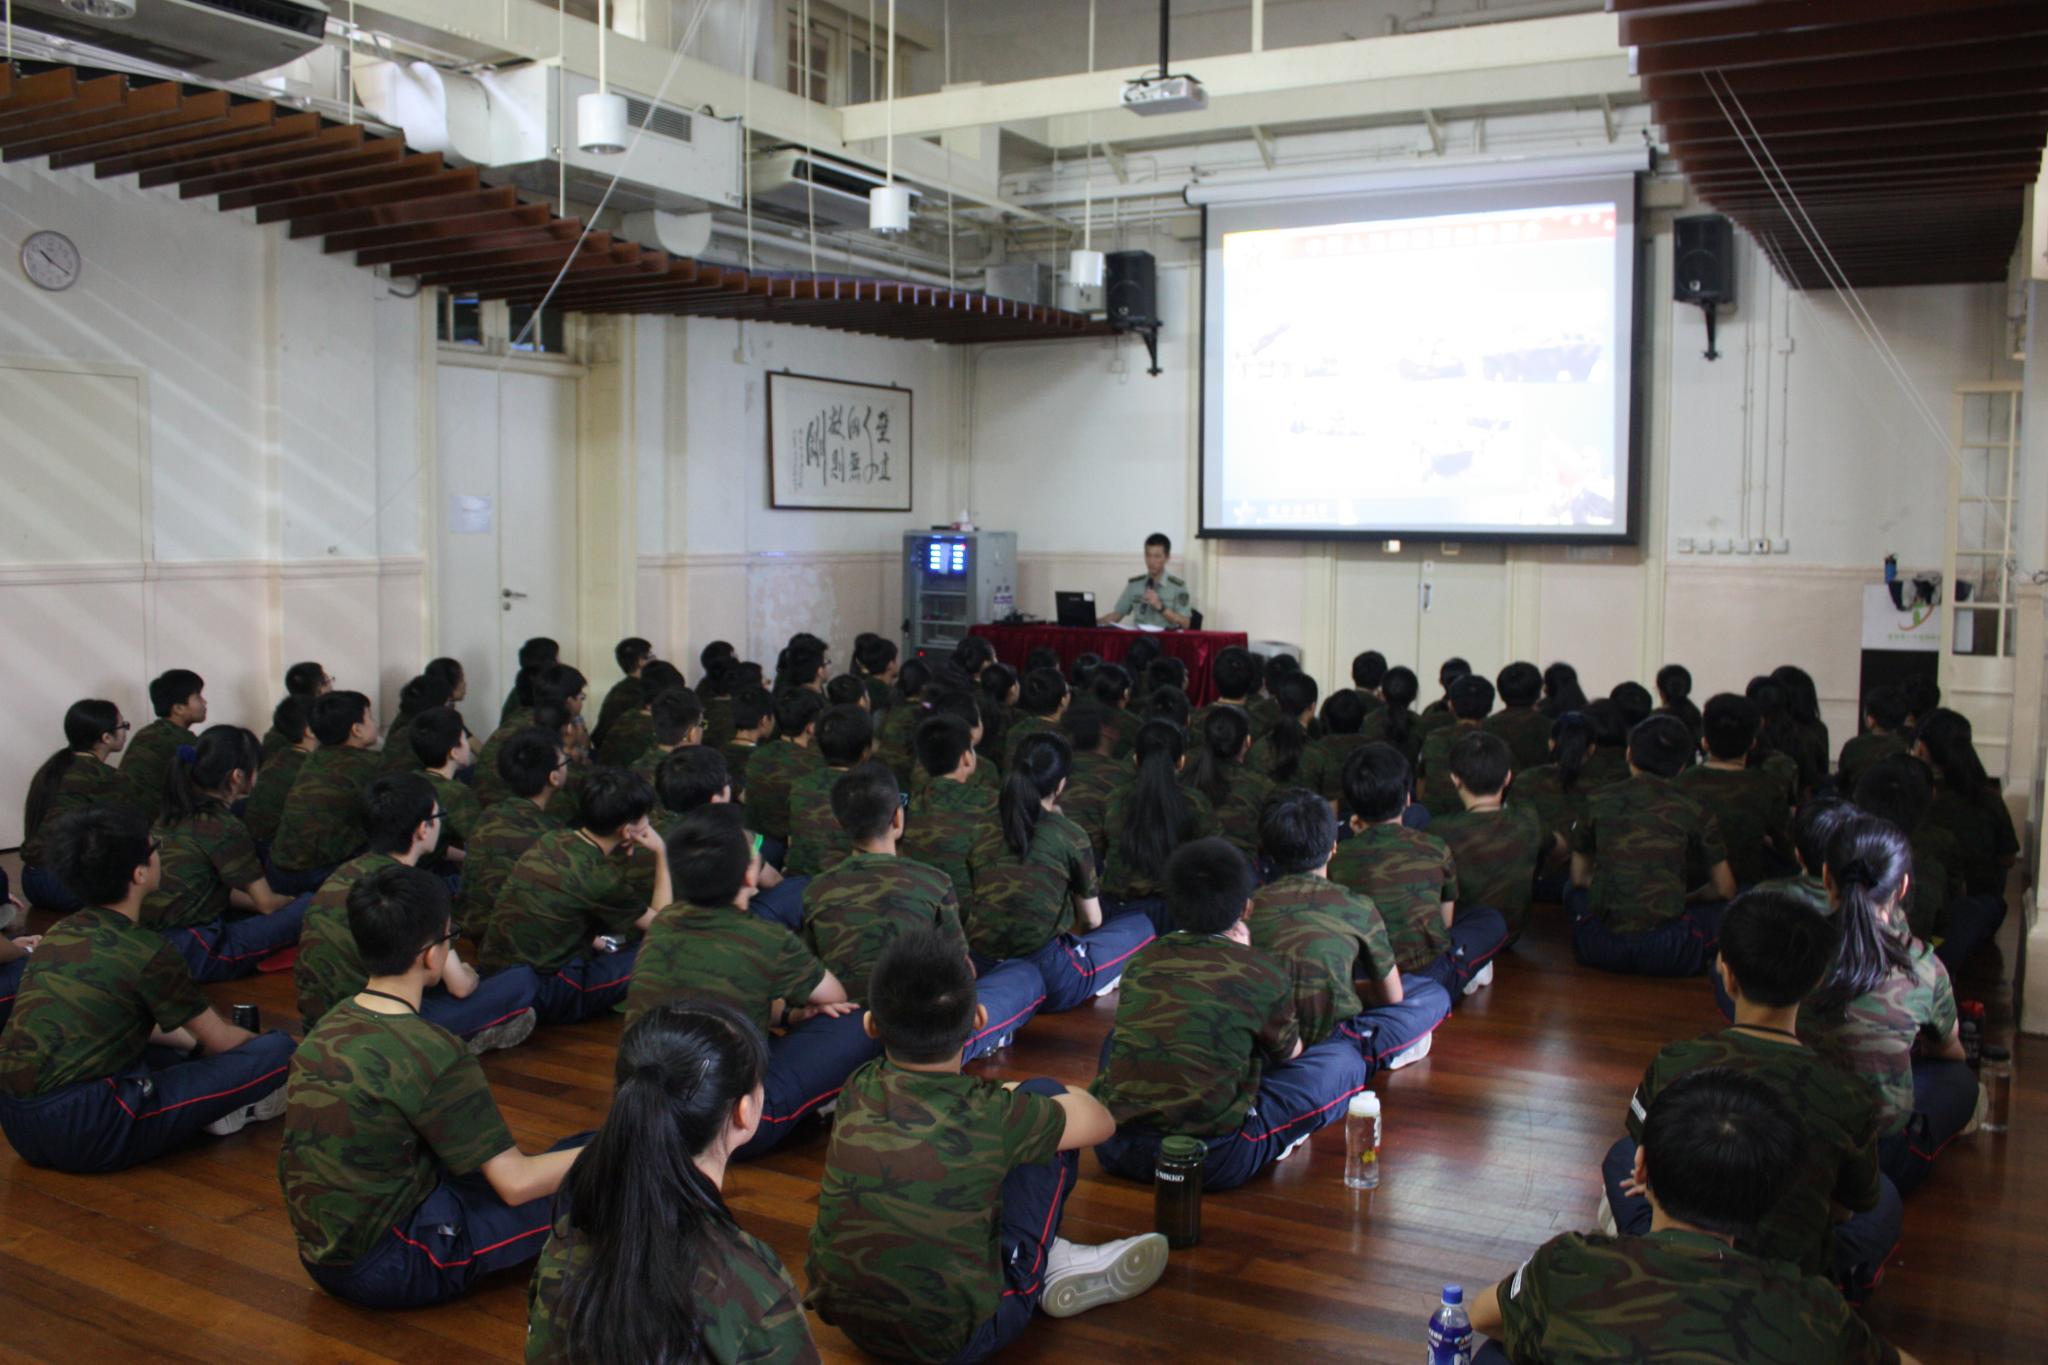 Students are very attentive during the talk delivered by the Chinese People's Liberation Army.